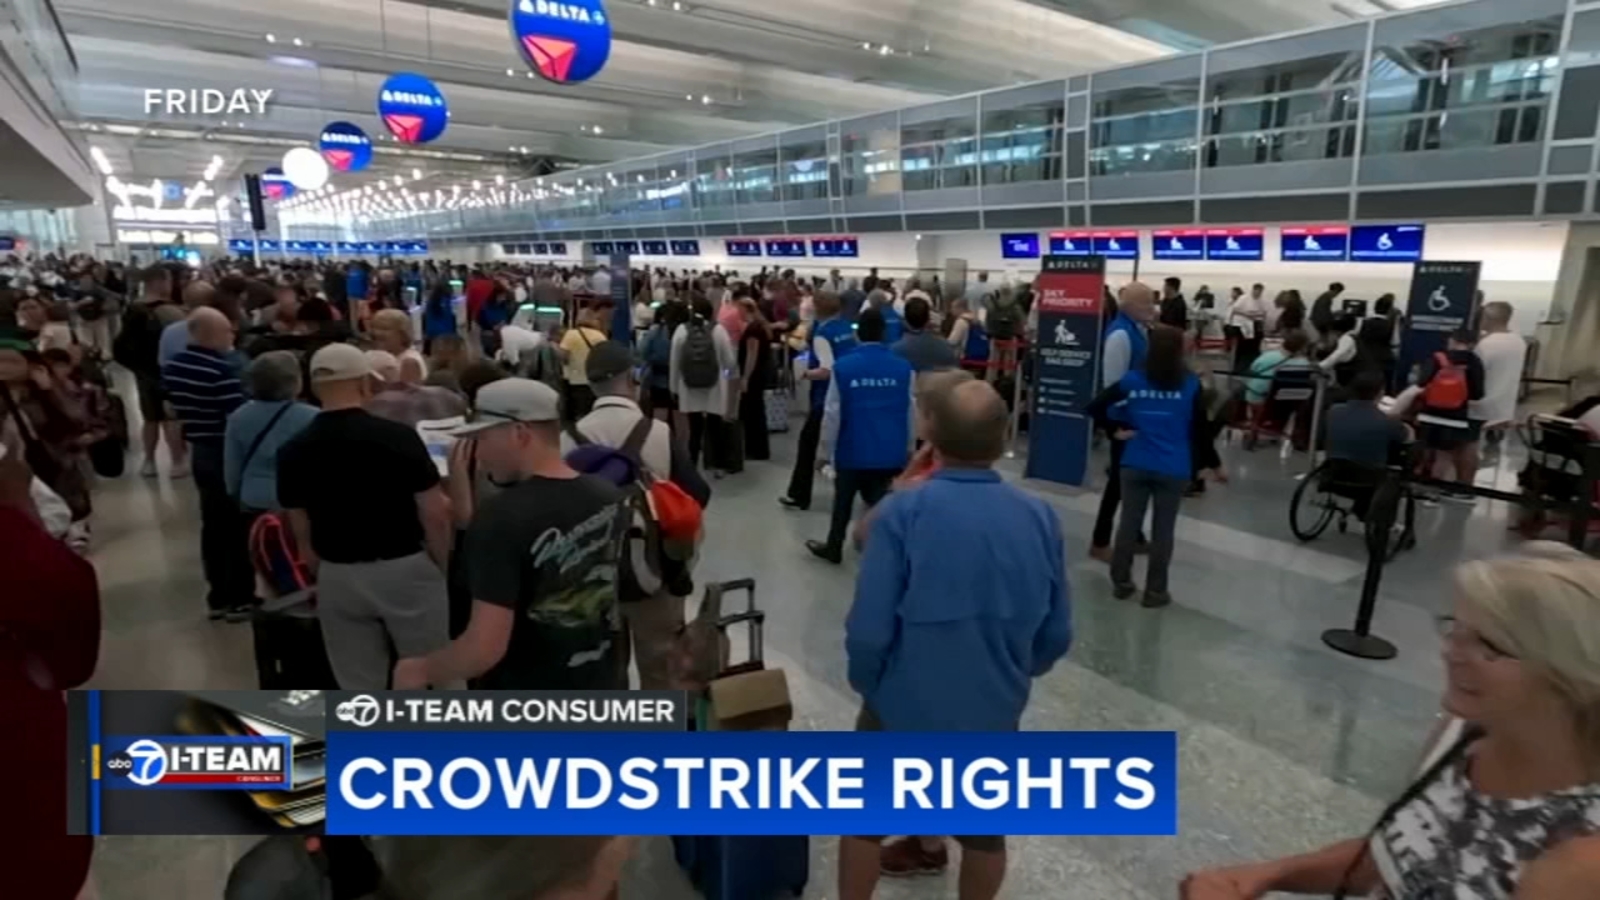 Here are your compensation rights if you were stranded or delayed by airlines due to CrowdStrike technology outage [Video]